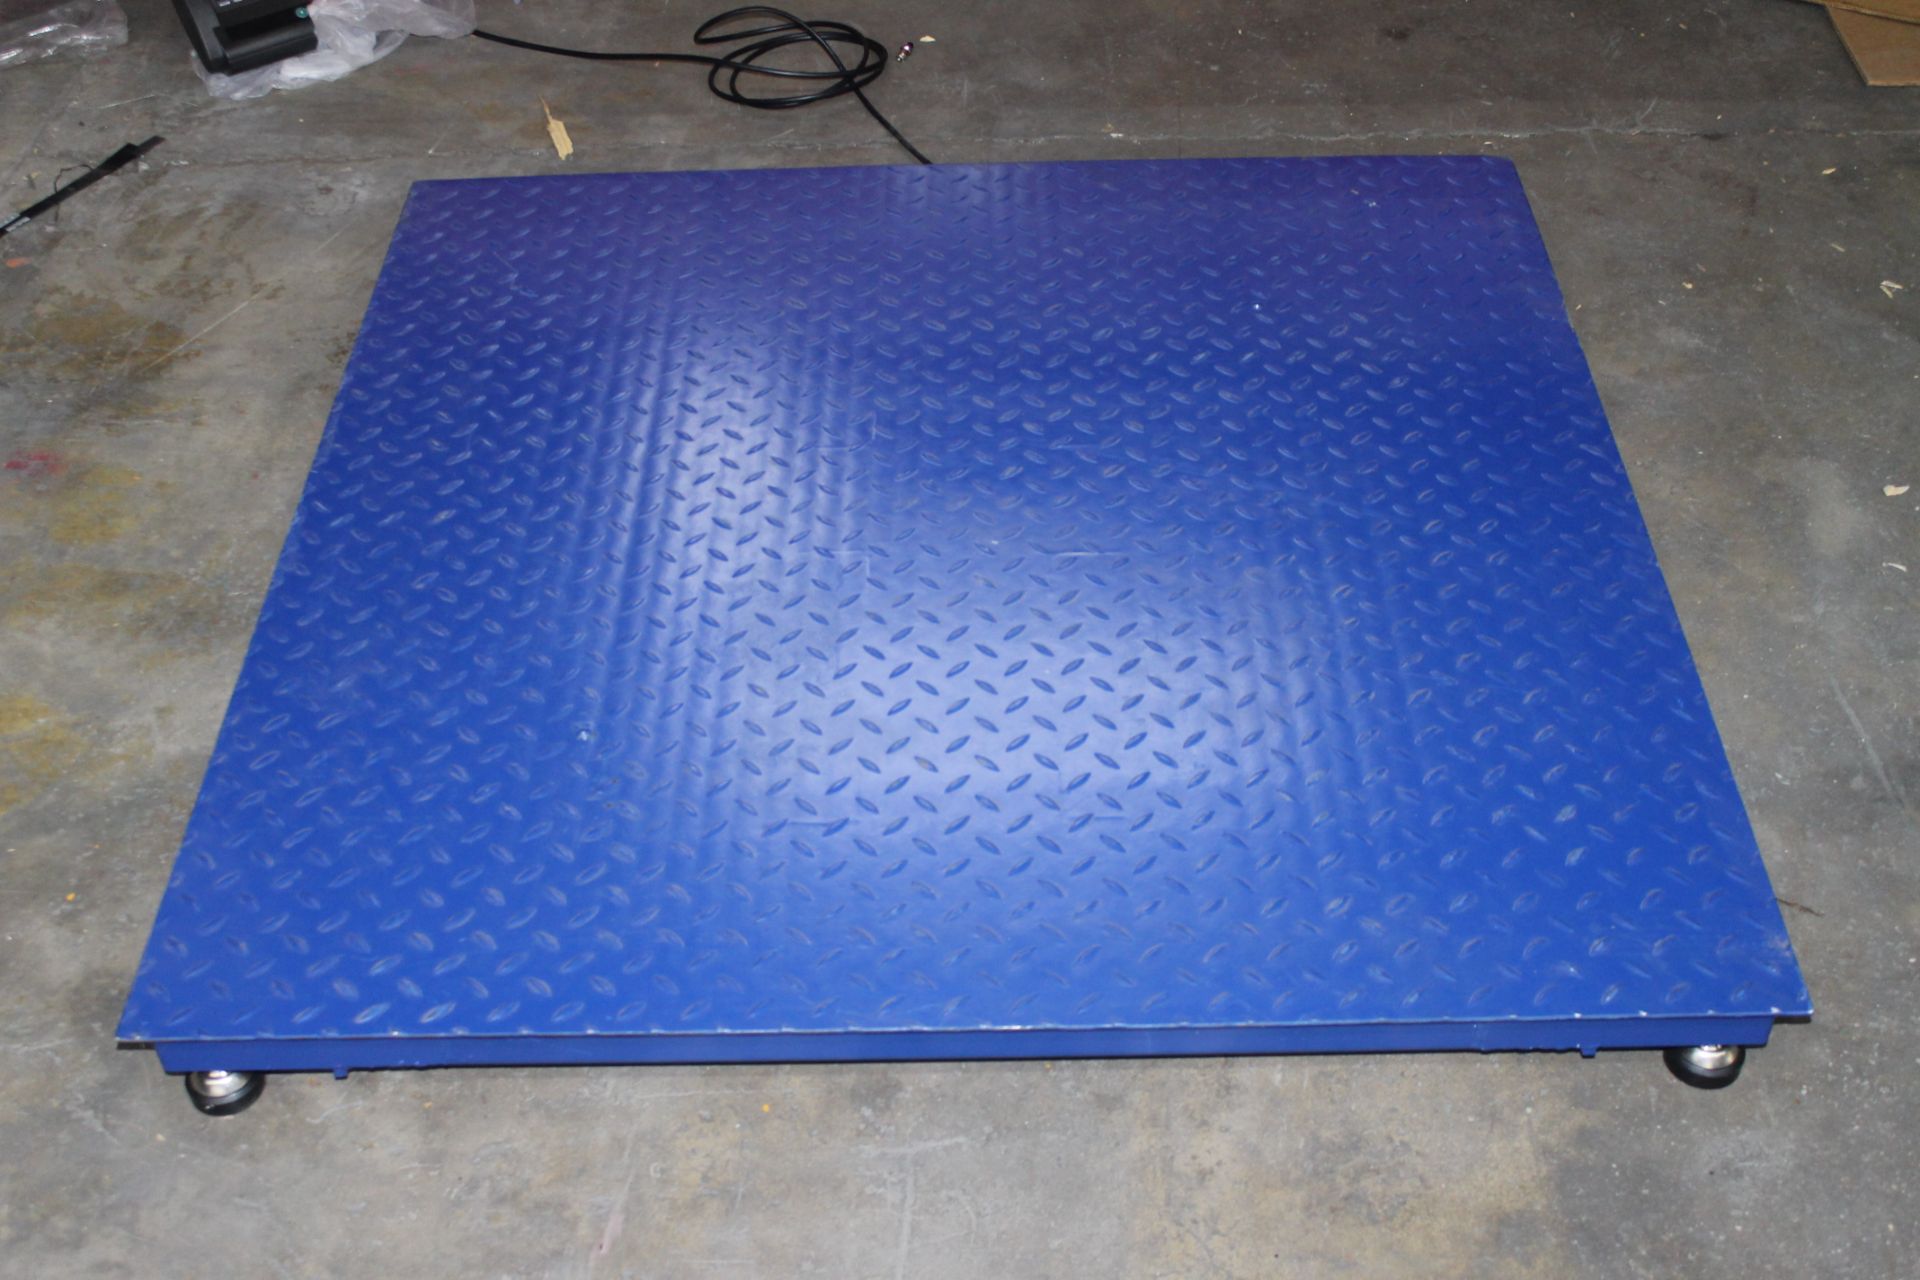 5000 LB CAP PALLET FLOOR SCALE WITH BATTERY POWERED DISPLAY - Image 2 of 2